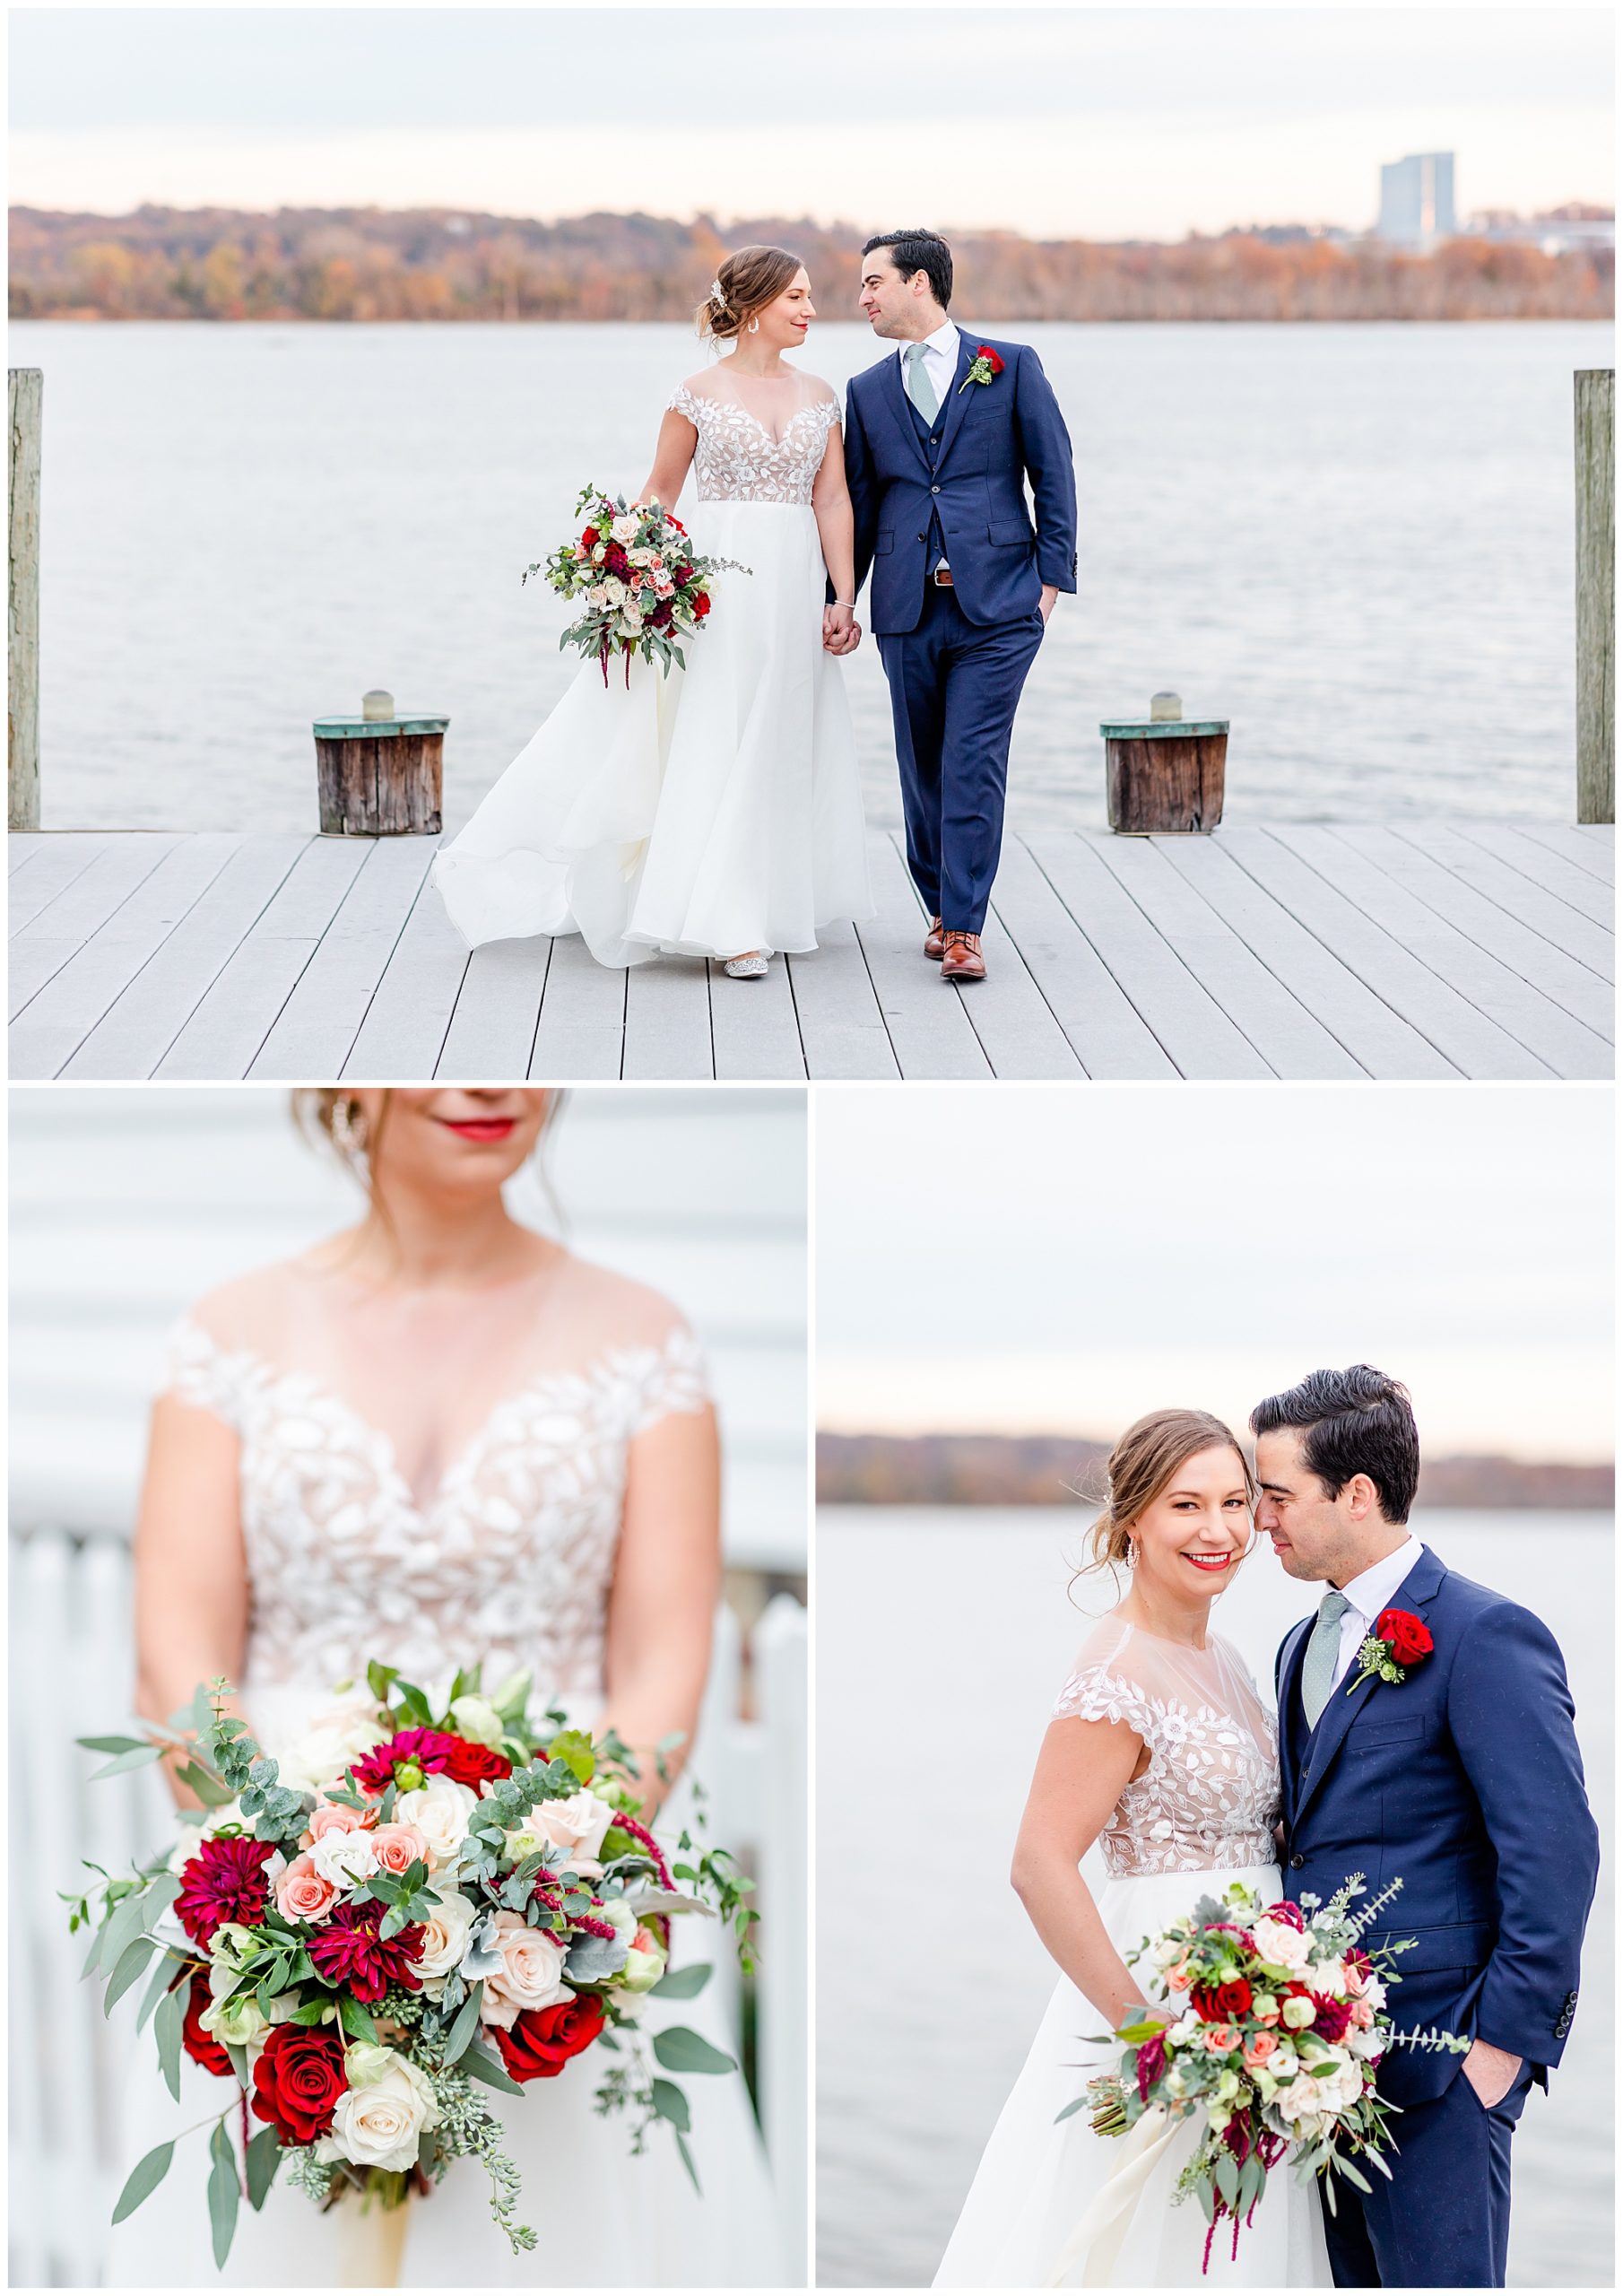 Lorien Alexandria winter wedding, Old Town Alexandria wedding, Alexandria Virginia wedding, DC micro wedding, northern Virginia wedding photographer, Alexandria Virginia wedding photographer, DC wedding photographer, winter wedding aesthetic, Rachel E.H. Photography, bride and groom holding hands on dock, bride holding bouquet in front of water